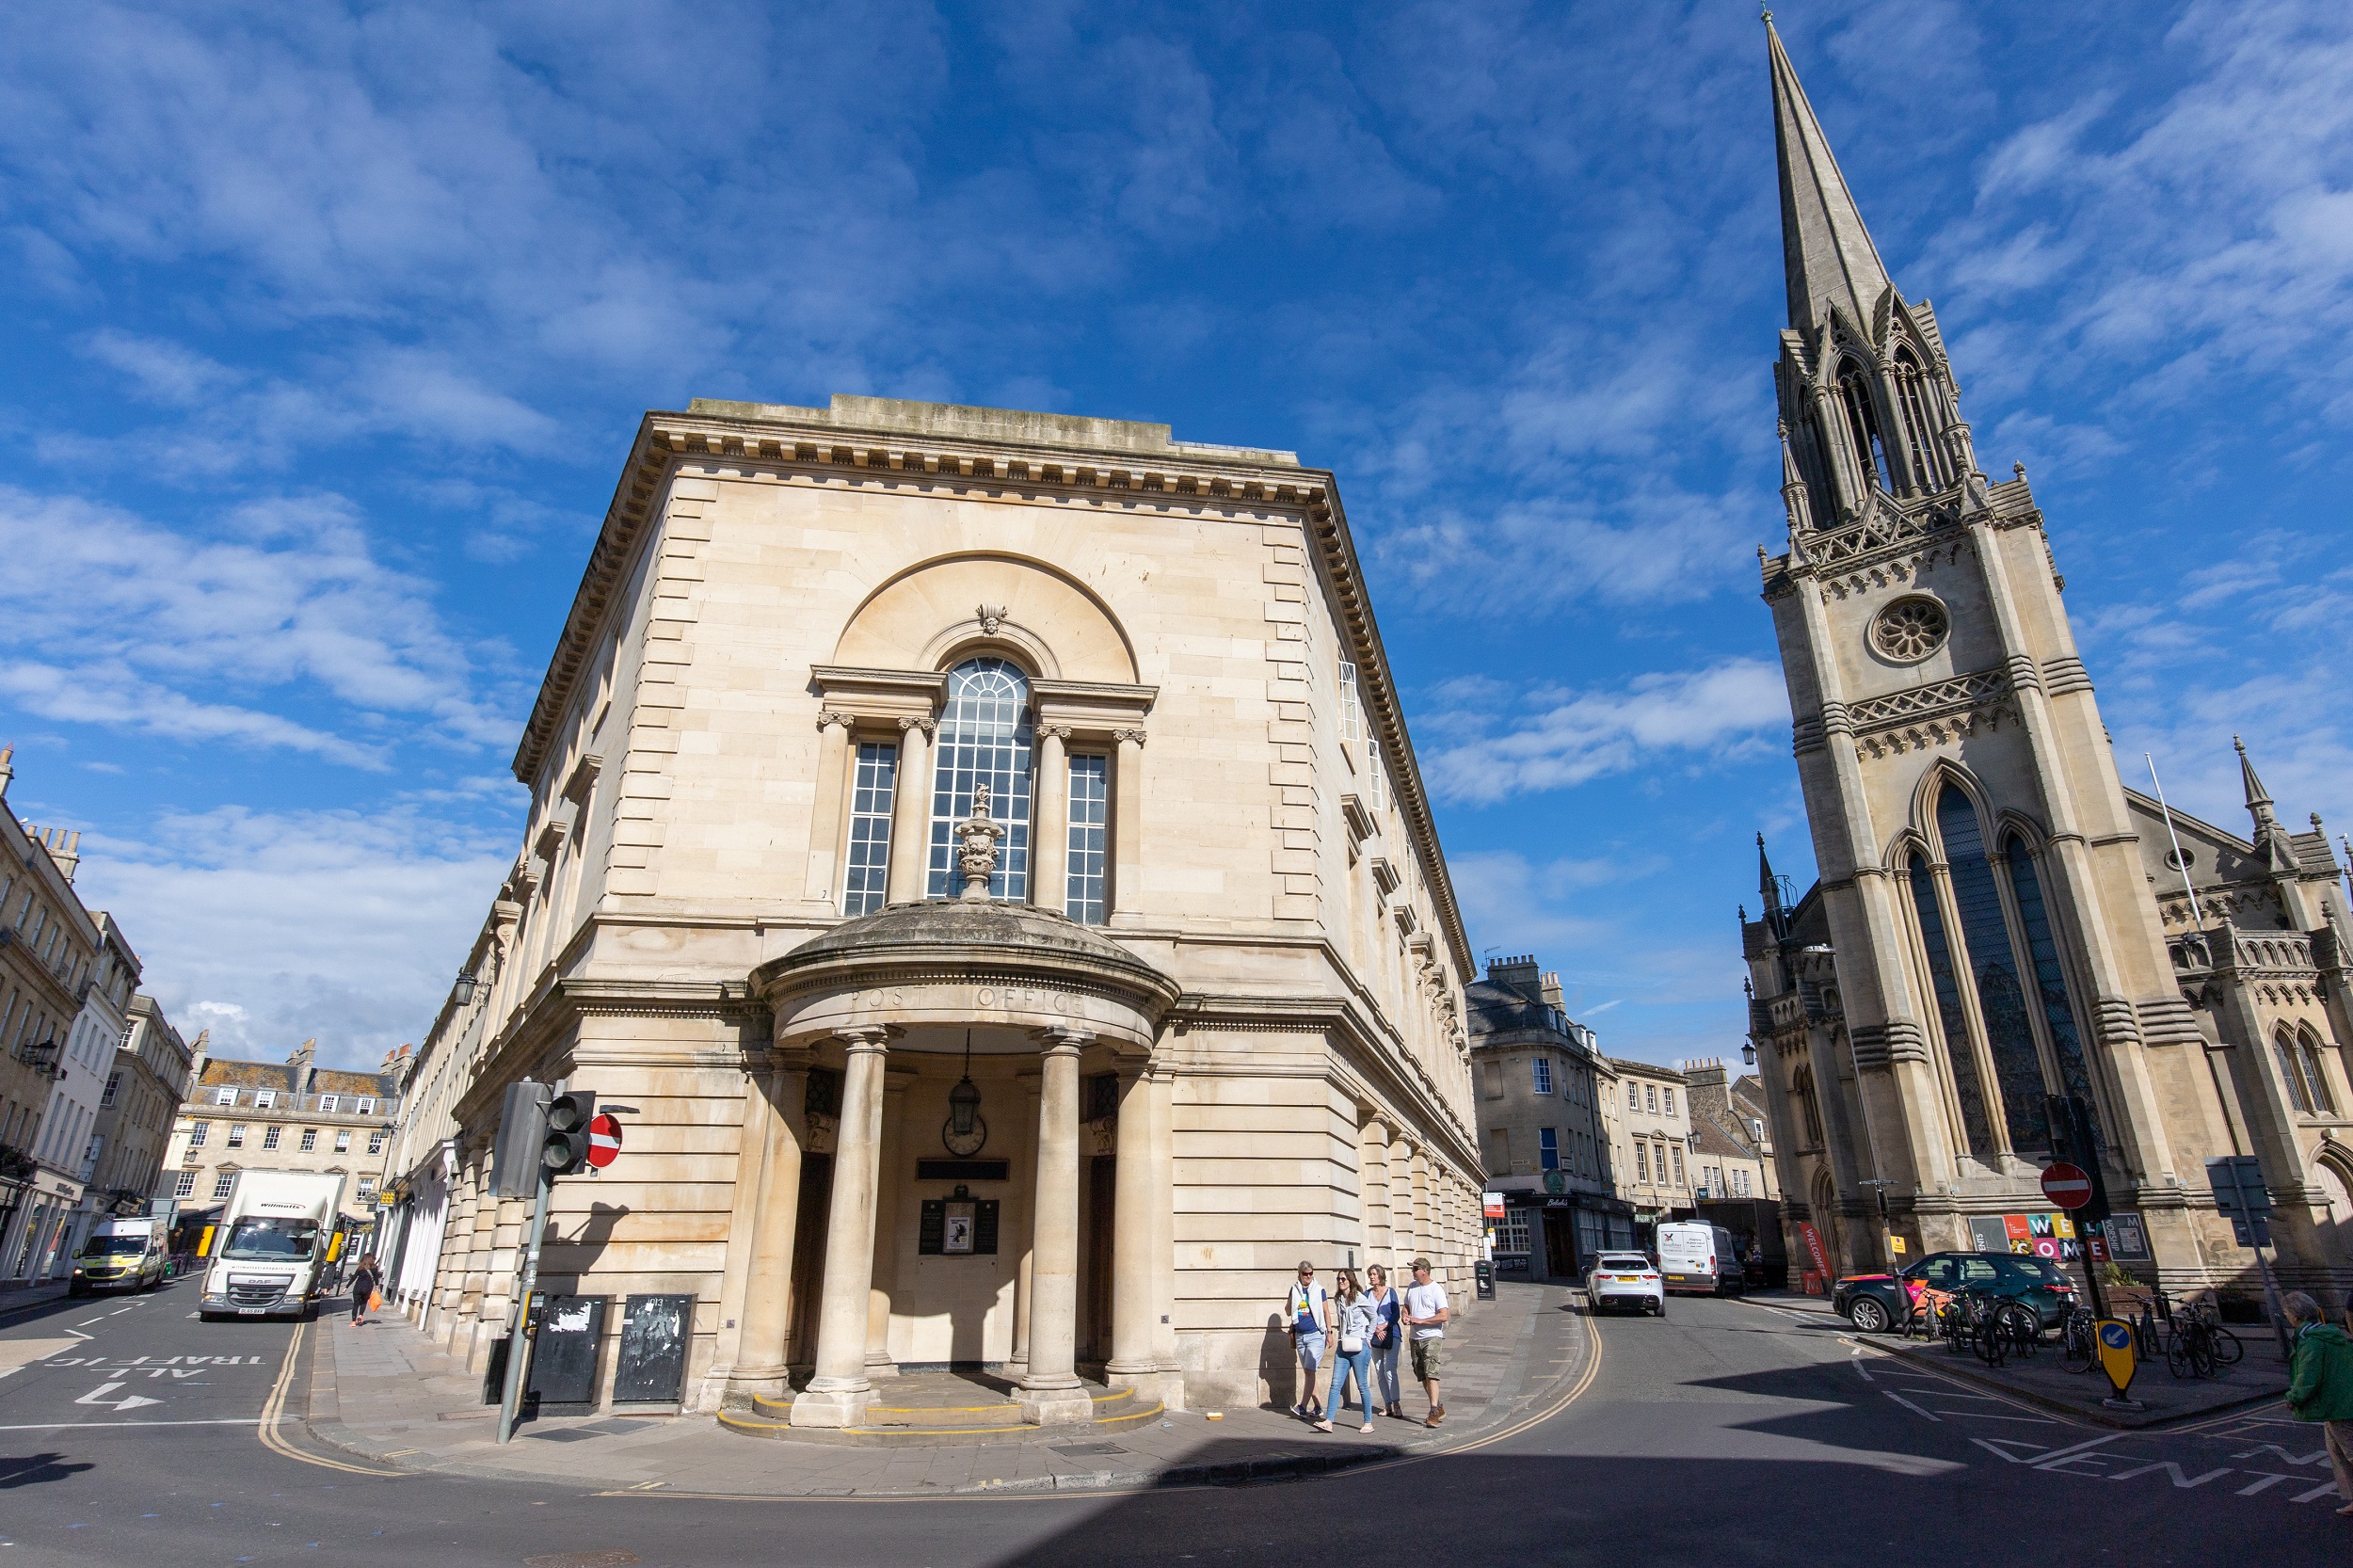 Image: The Old Post Office Building in Bath